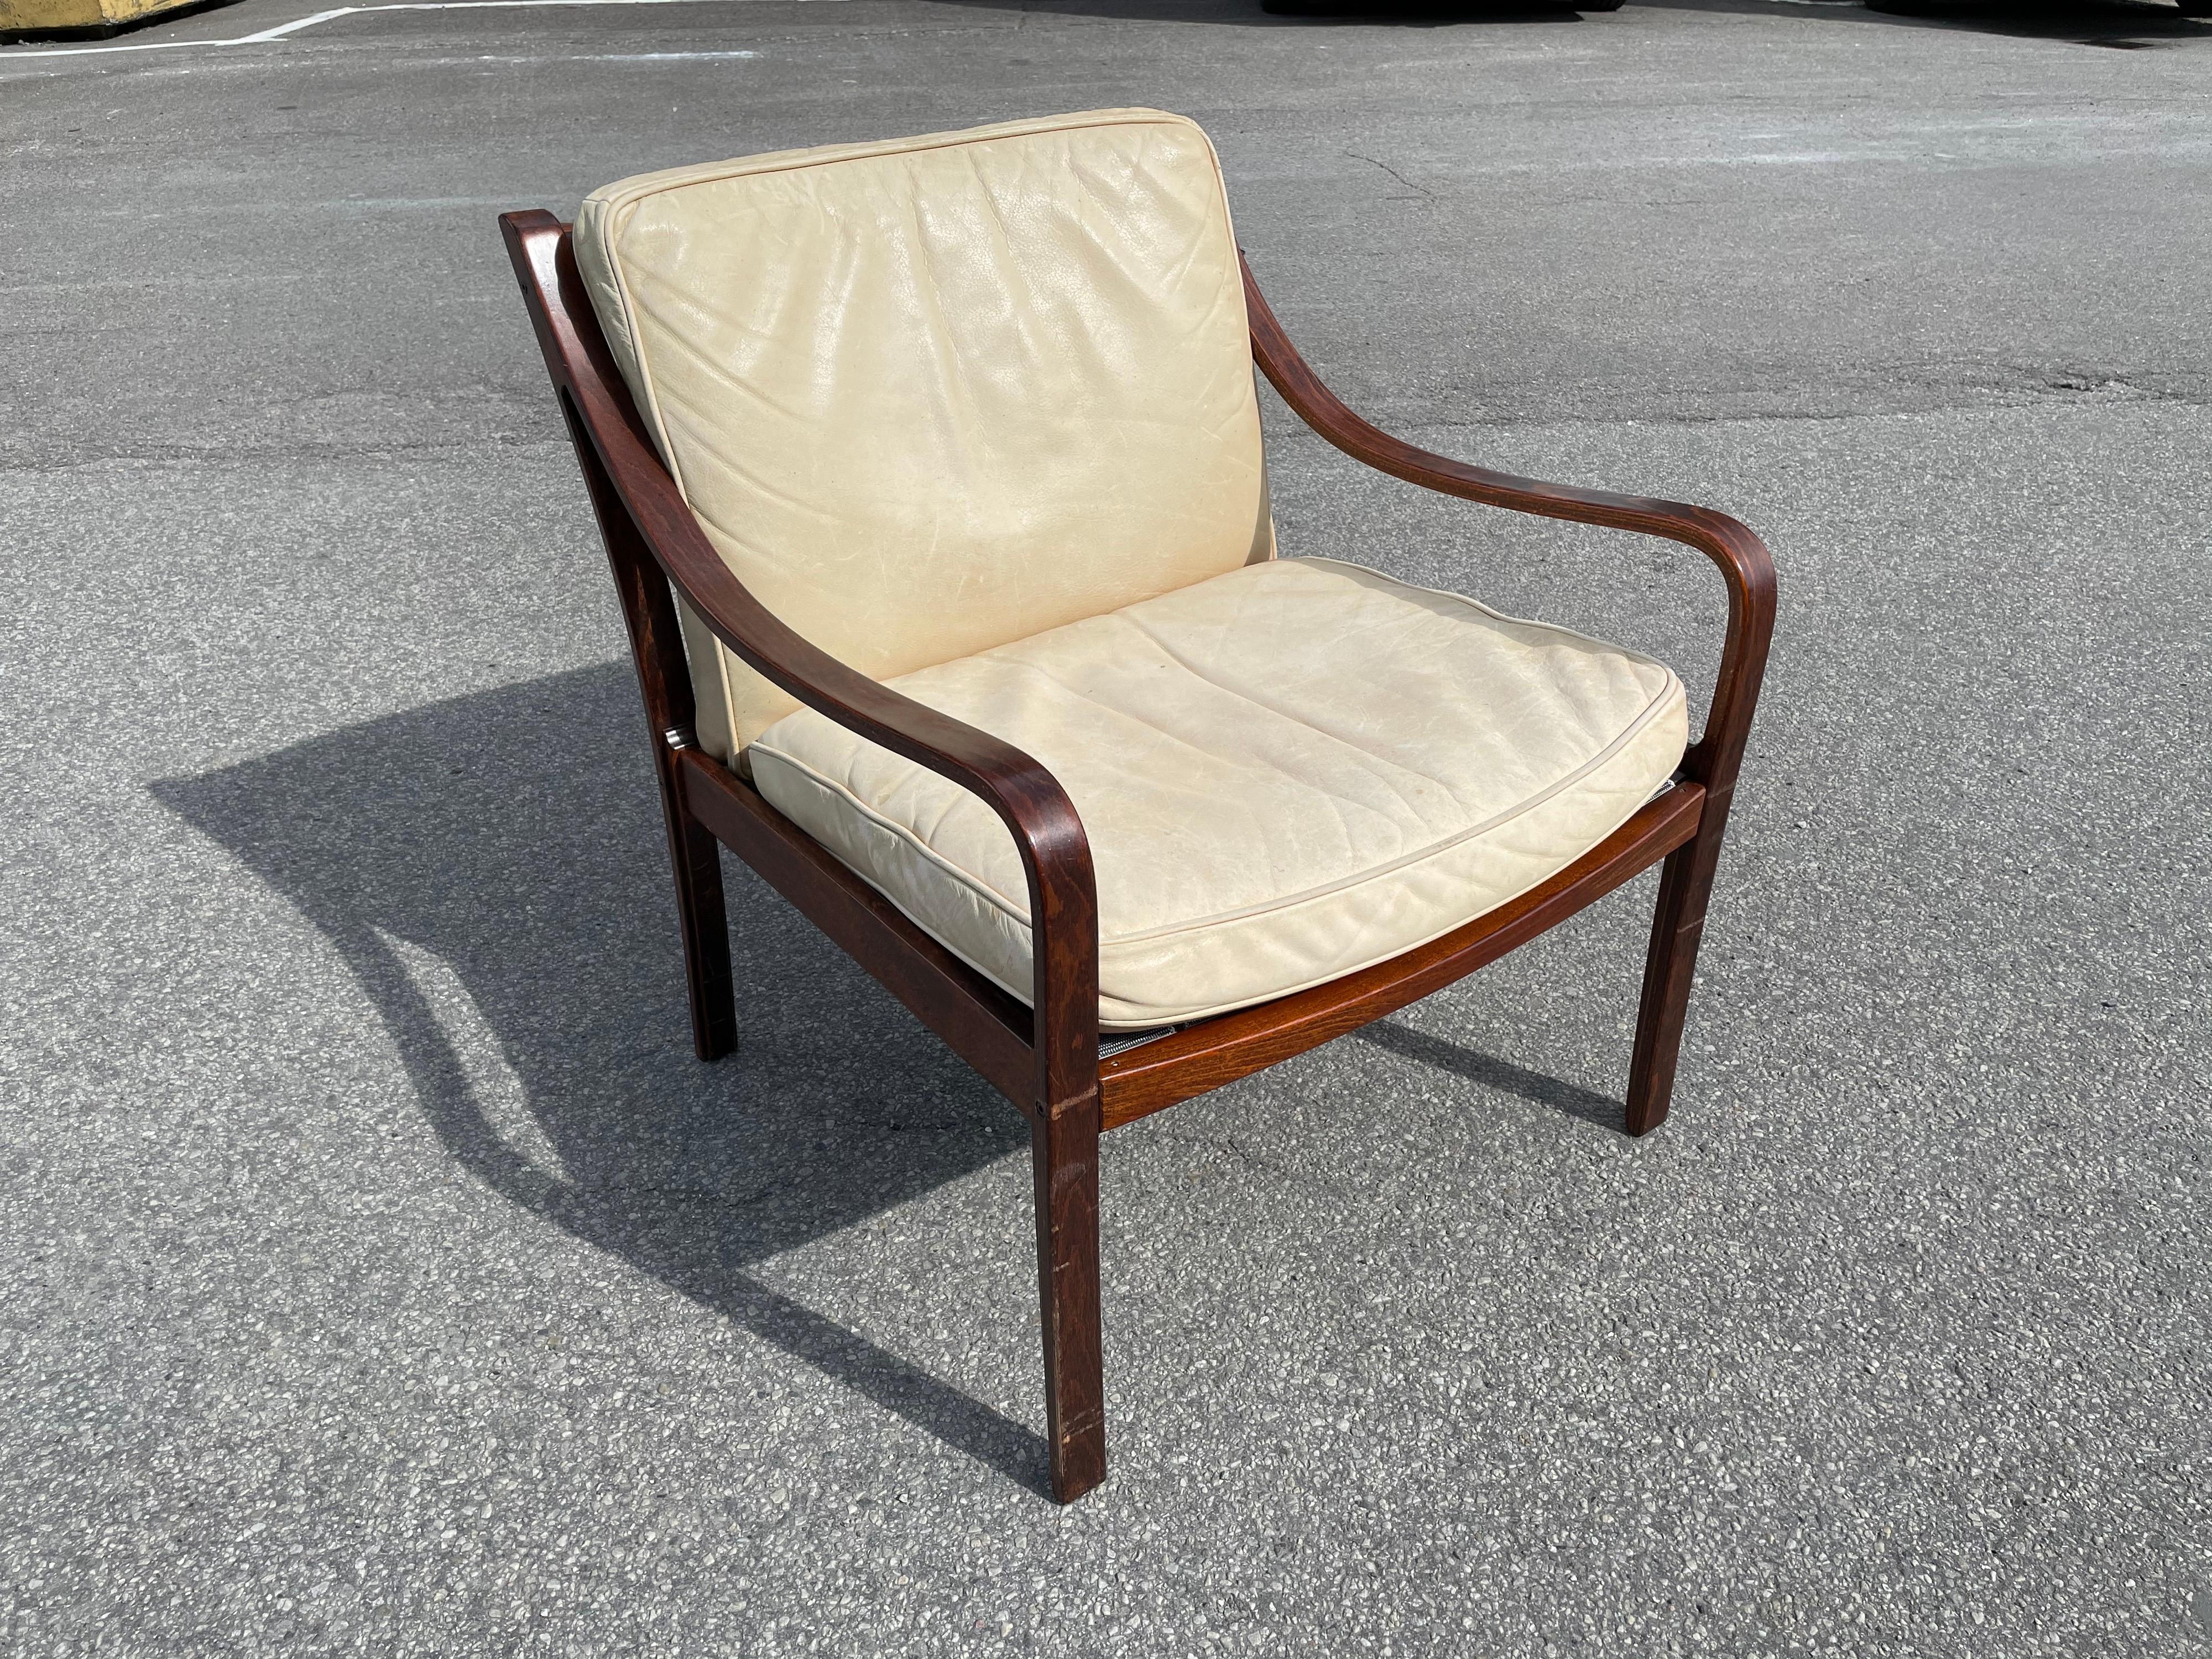 Mid-Century Modern Pair of Lounge Chairs by Fredrik Kayser for Vatne Møbler, 1960s For Sale